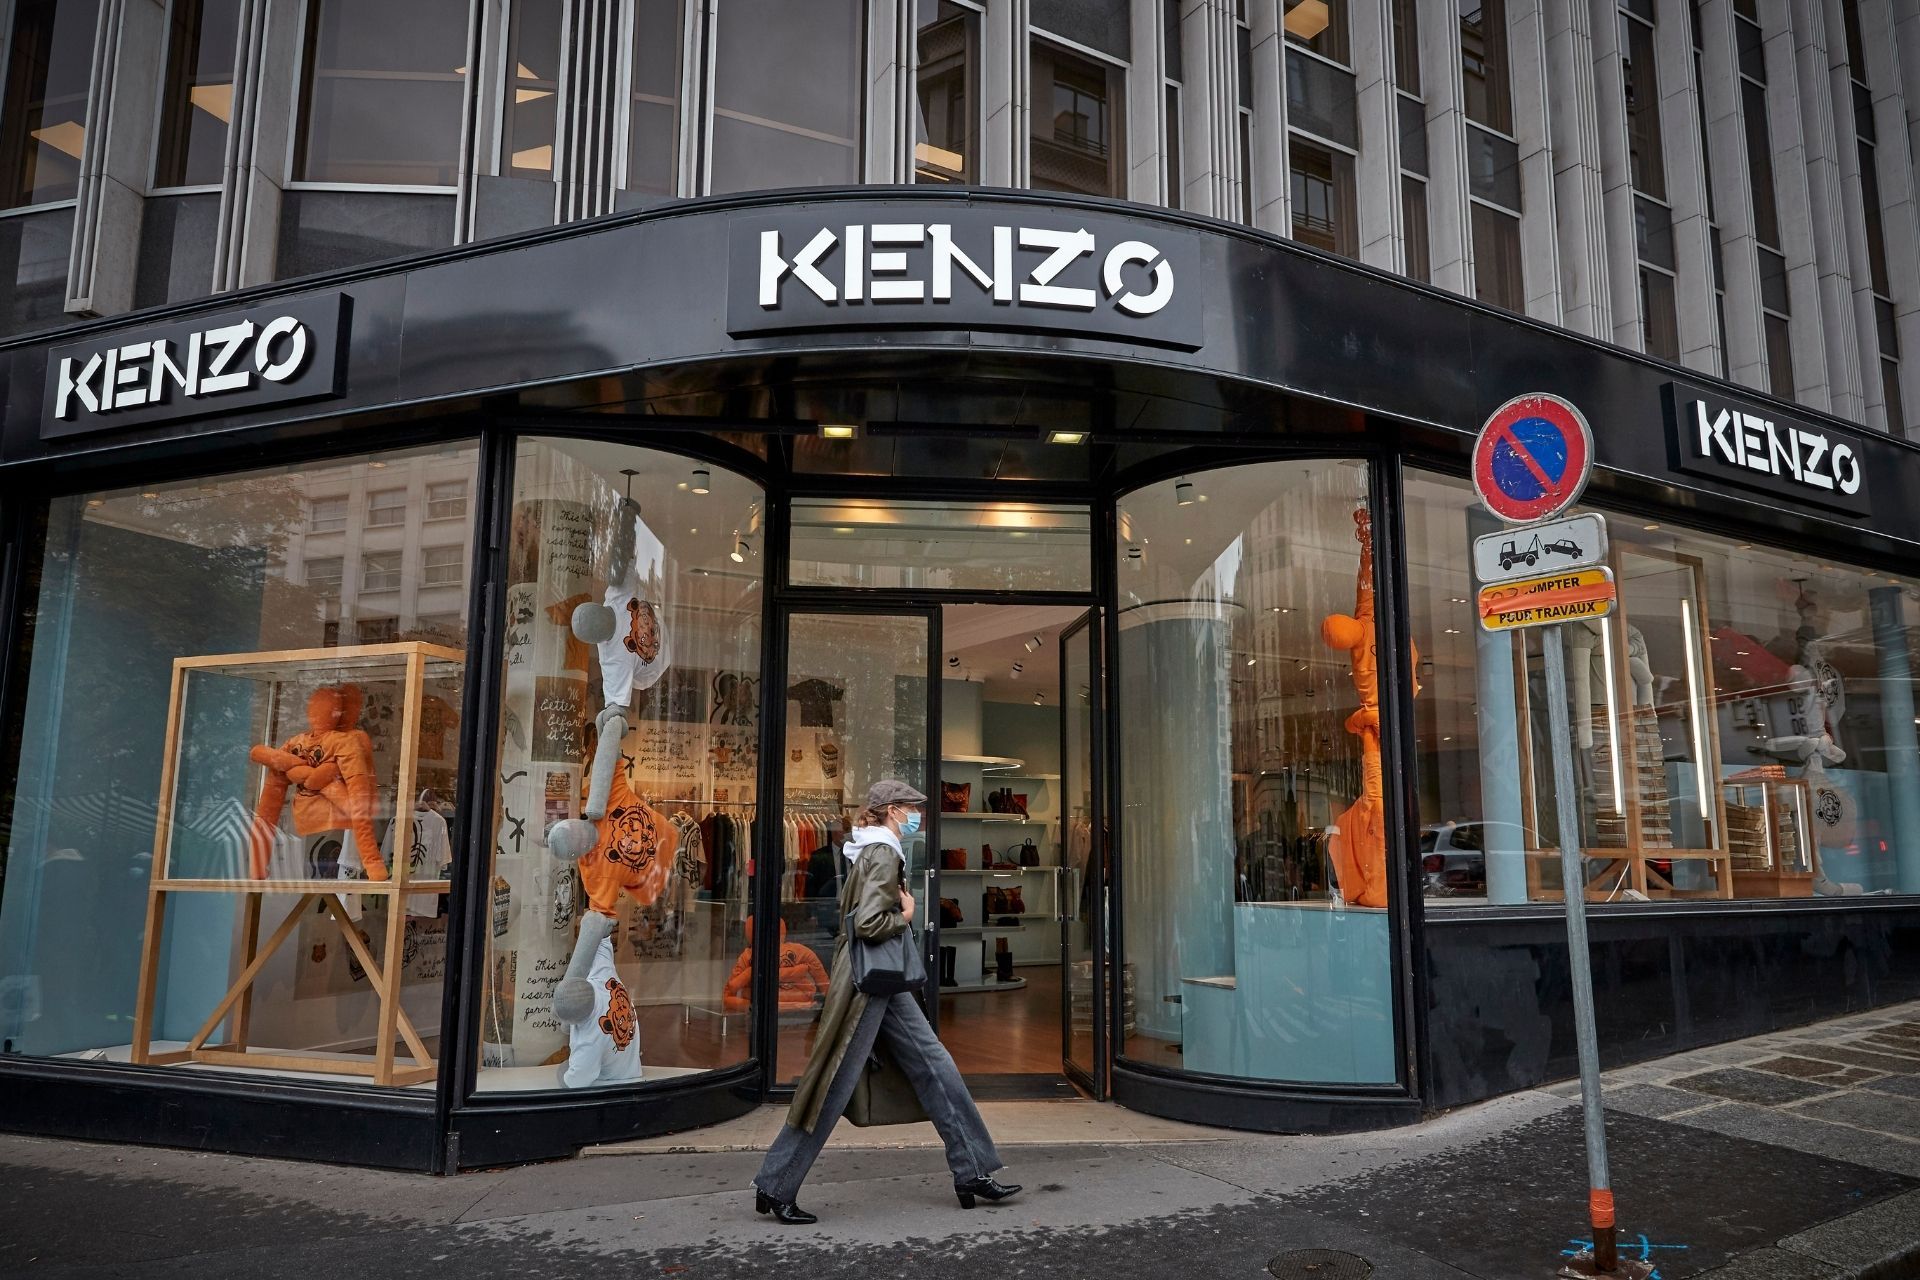 The biggest luxury conglomerates in the world